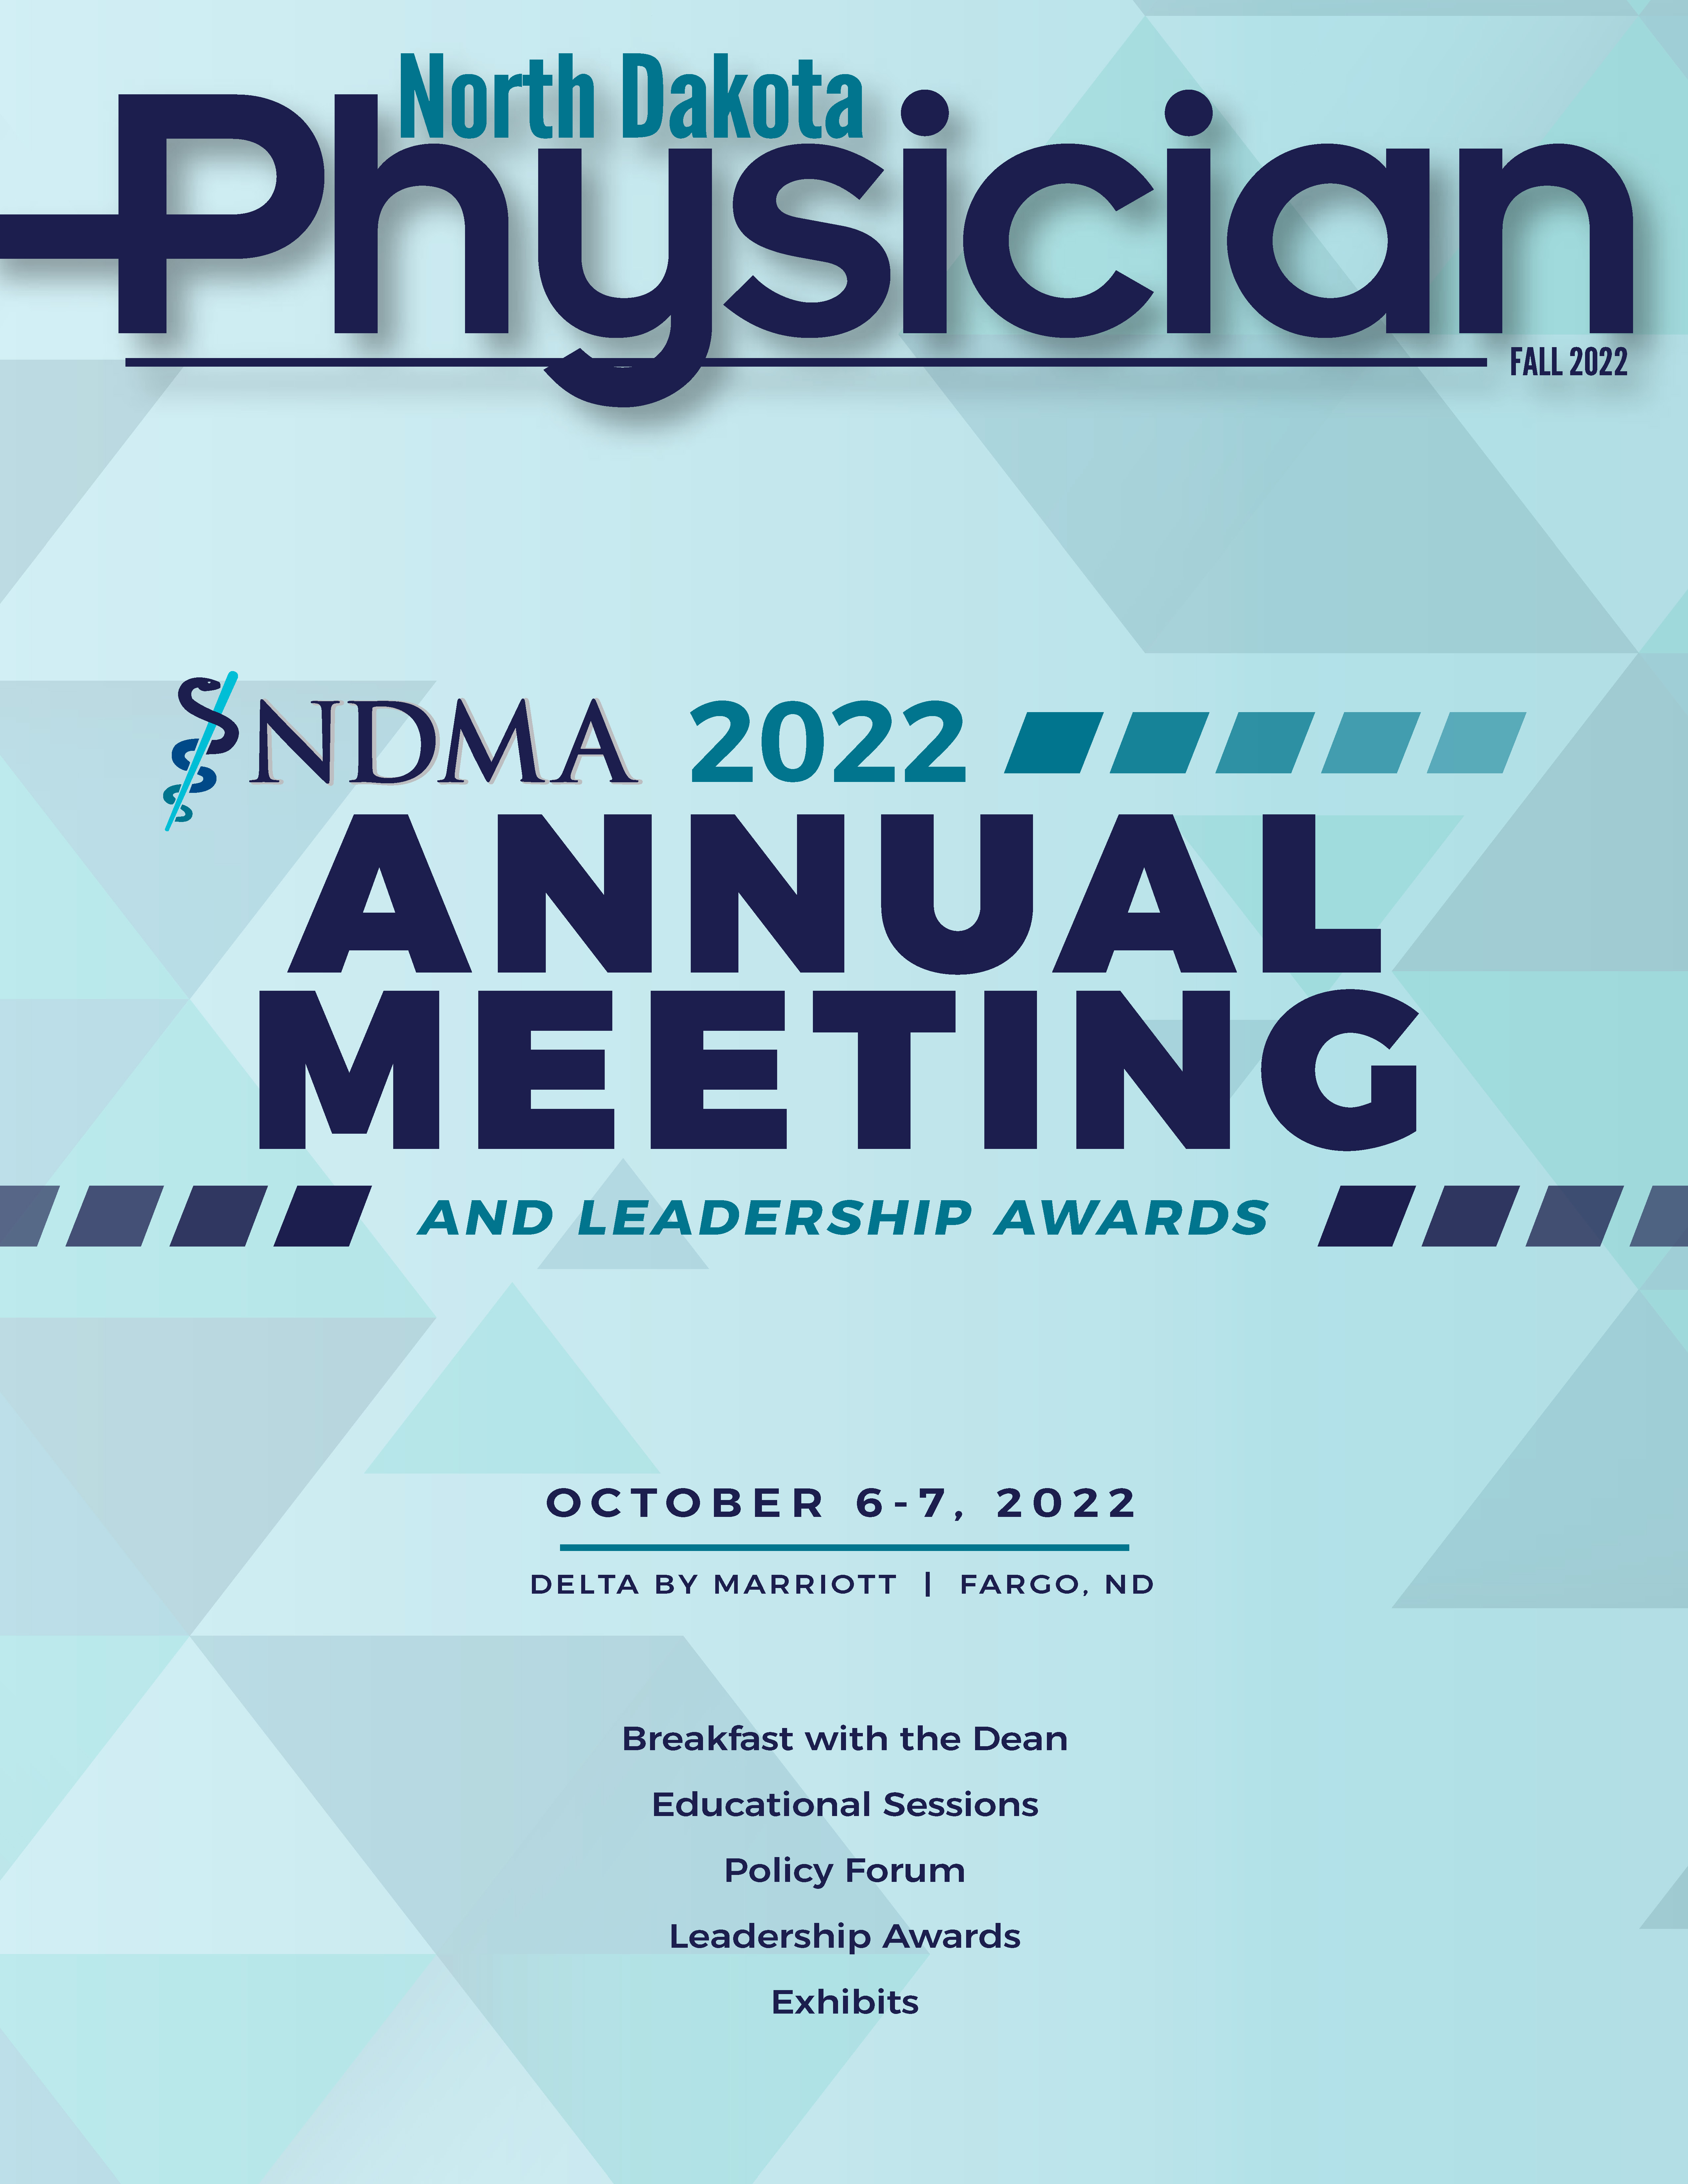 ND Physician Fall 2022 magazine cover